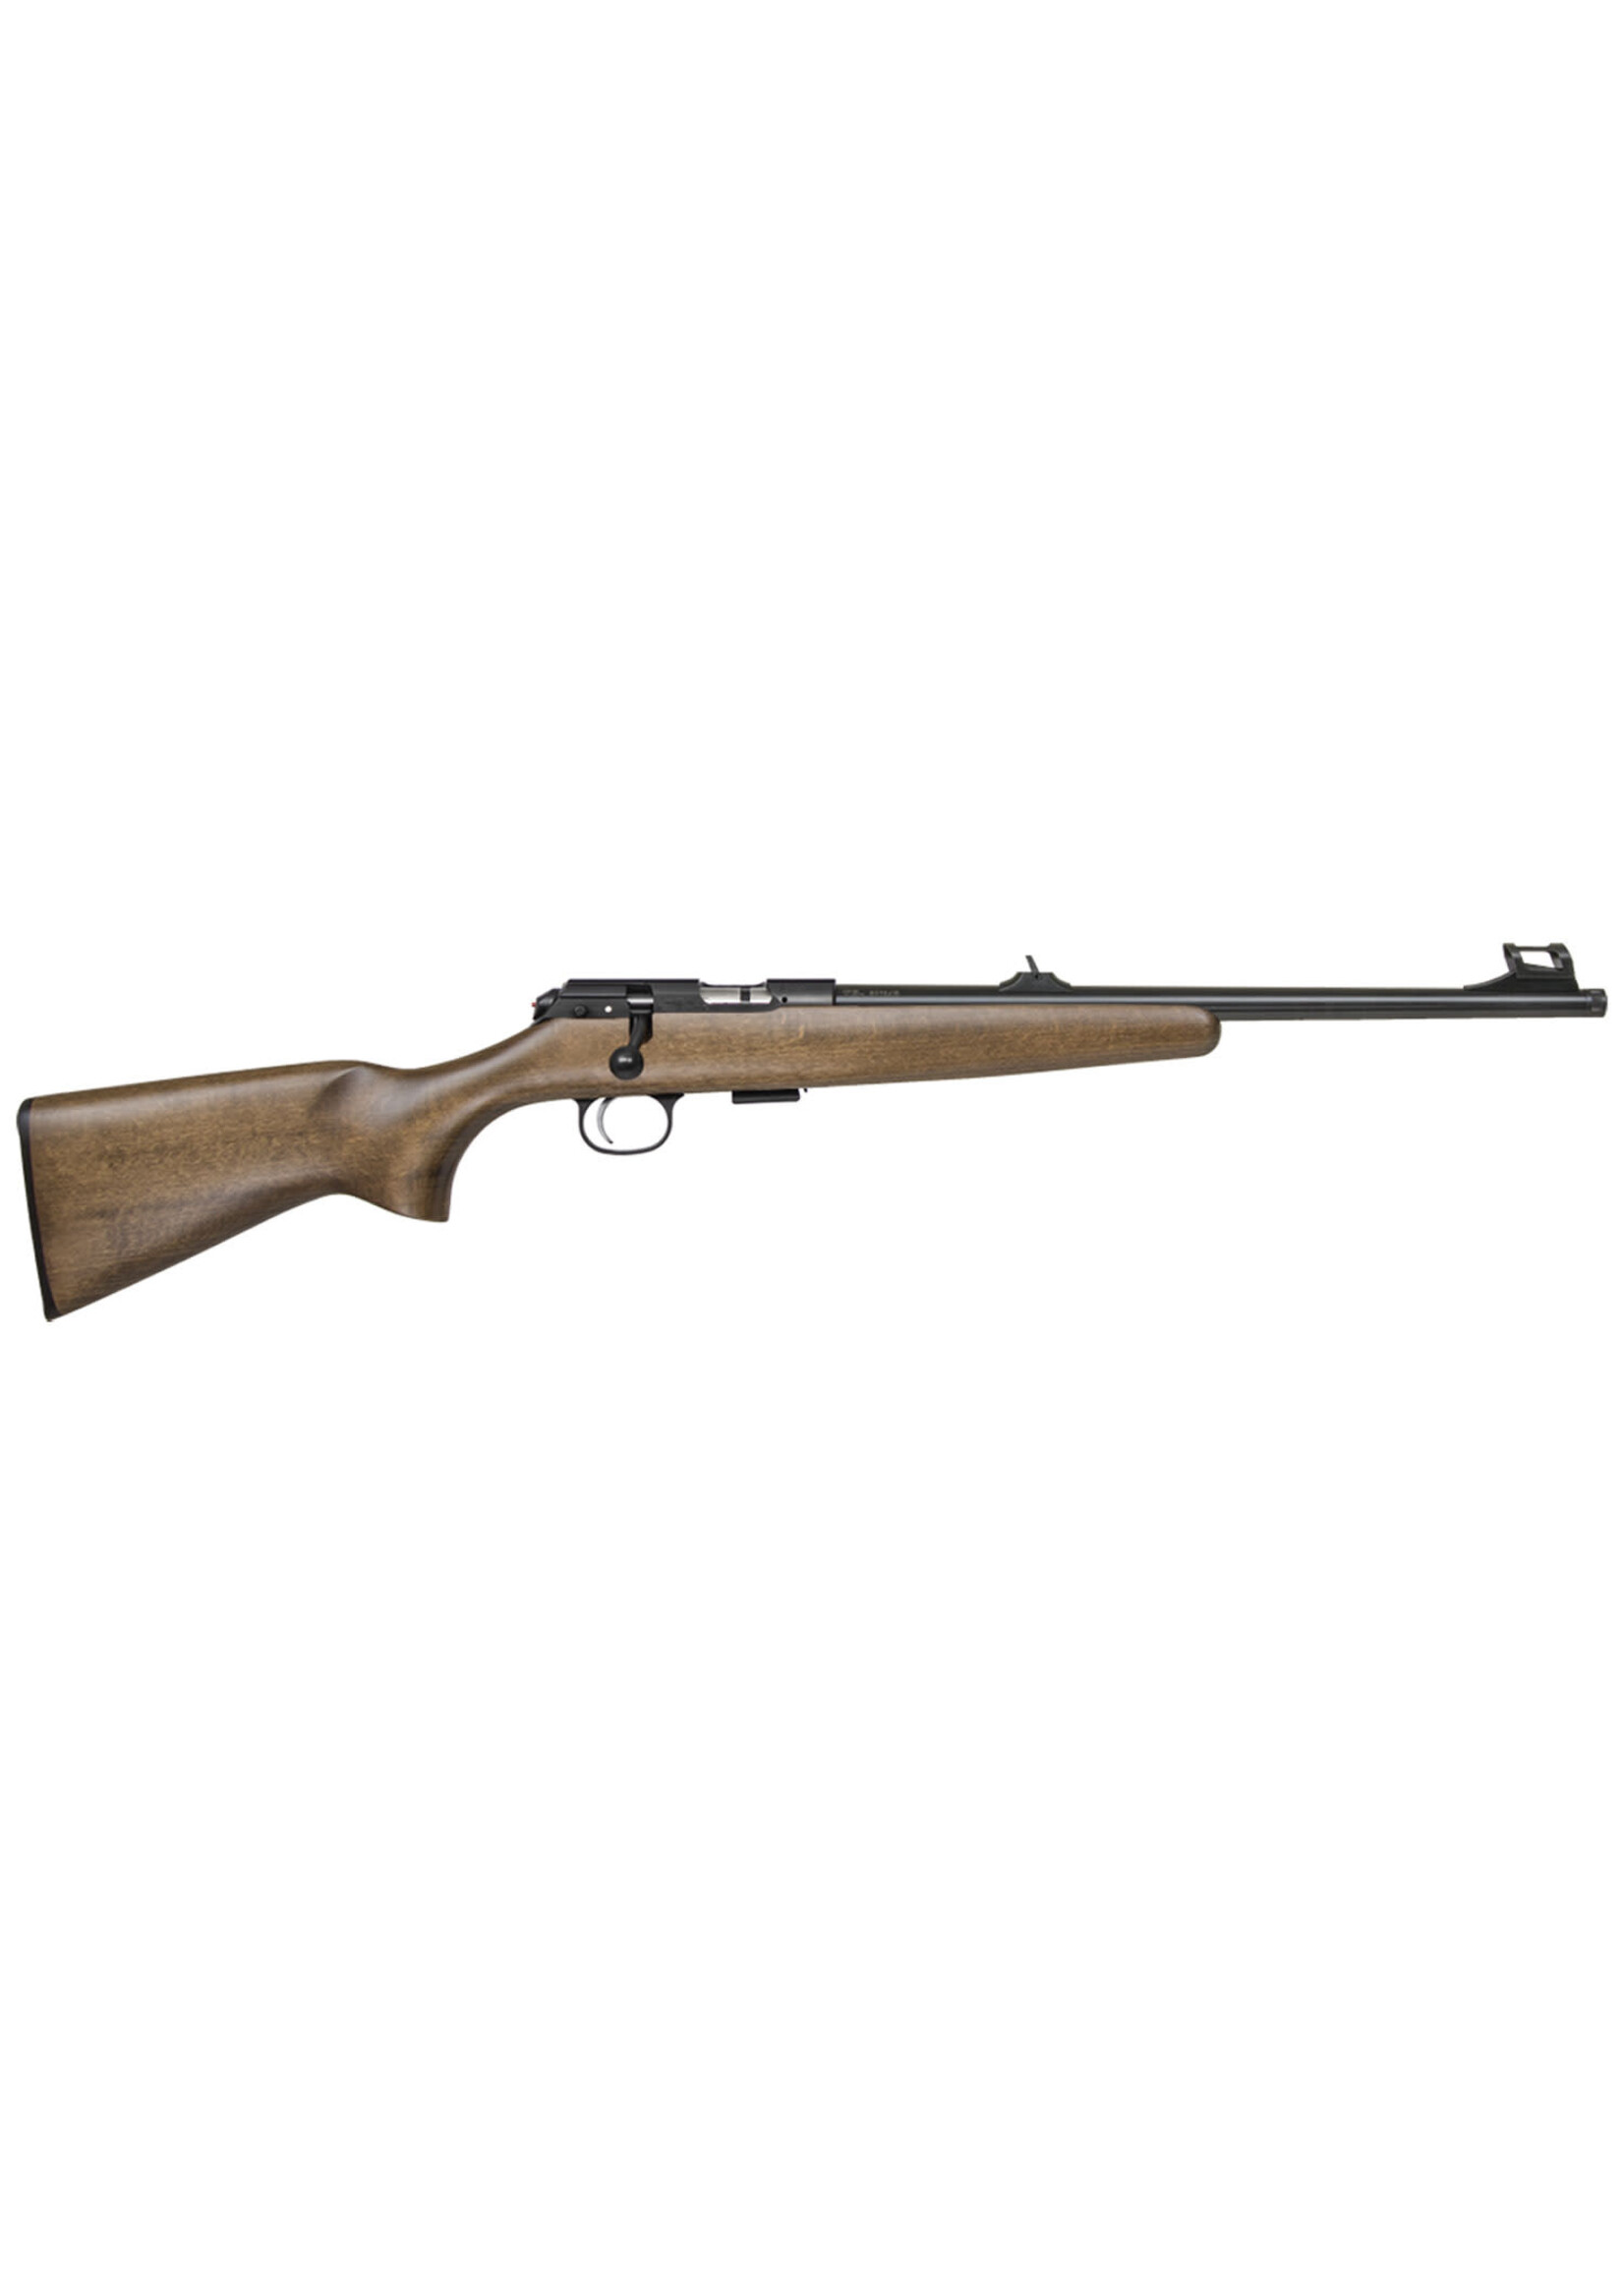 CZ USA CZ-USA 02335 CZ 457 Scout 22 LR Caliber with 1rd Capacity, 16" Barrel, Black Nitride Metal Finish & Fixed American-Style Beechwood Stock, Right Hand (Full Size)